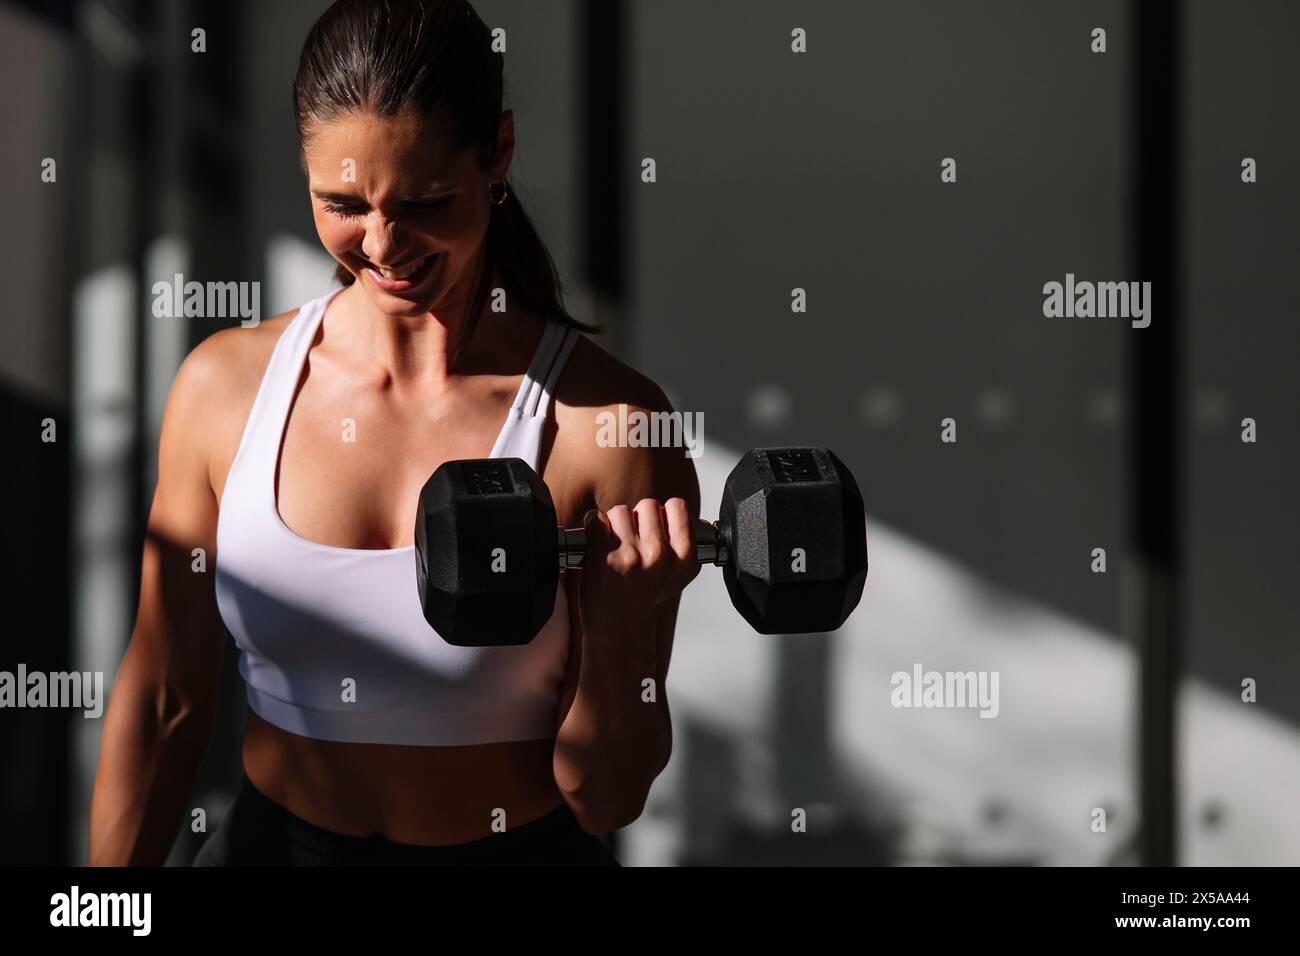 A focused athletic woman lifts weights at home, showcasing strength and dedication to fitness Stock Photo